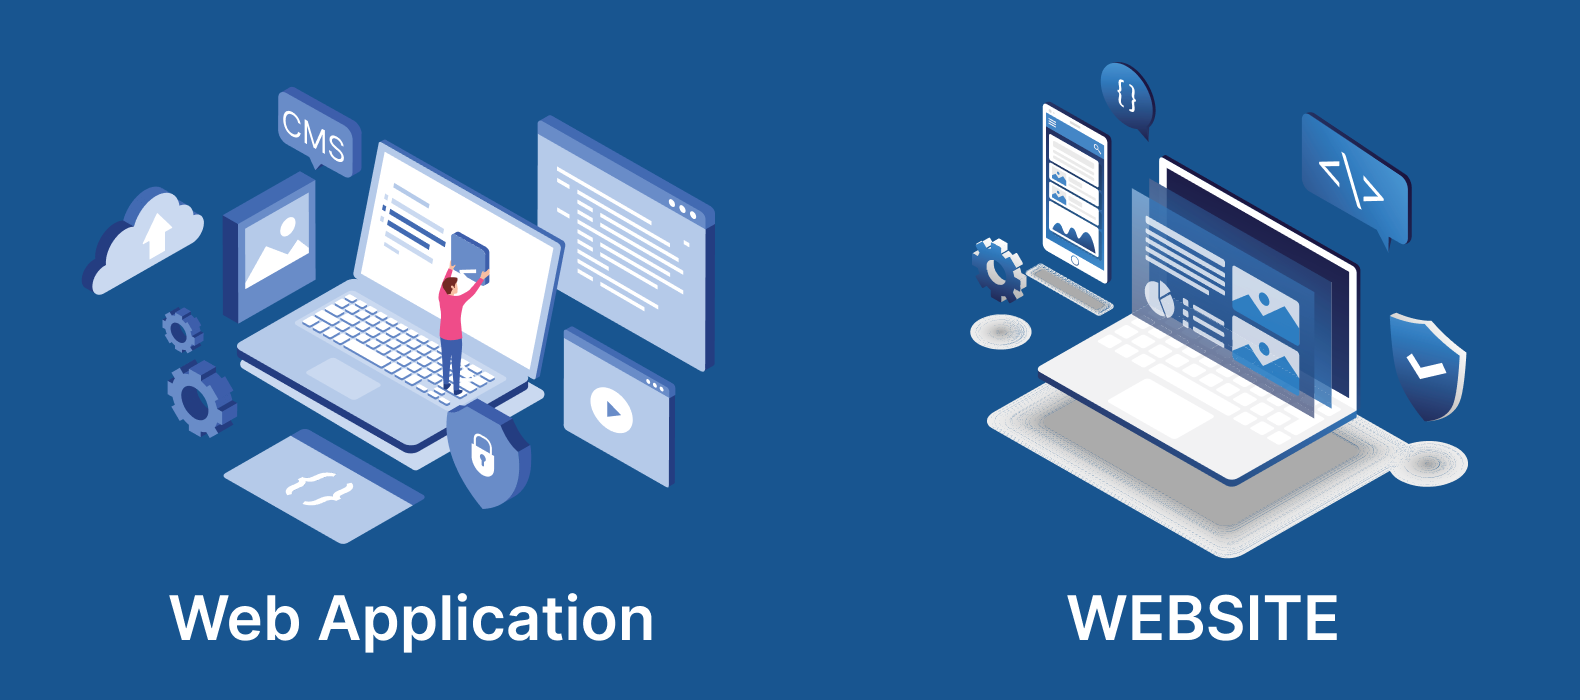 What Determines Whether to Use a Website or a Web Application